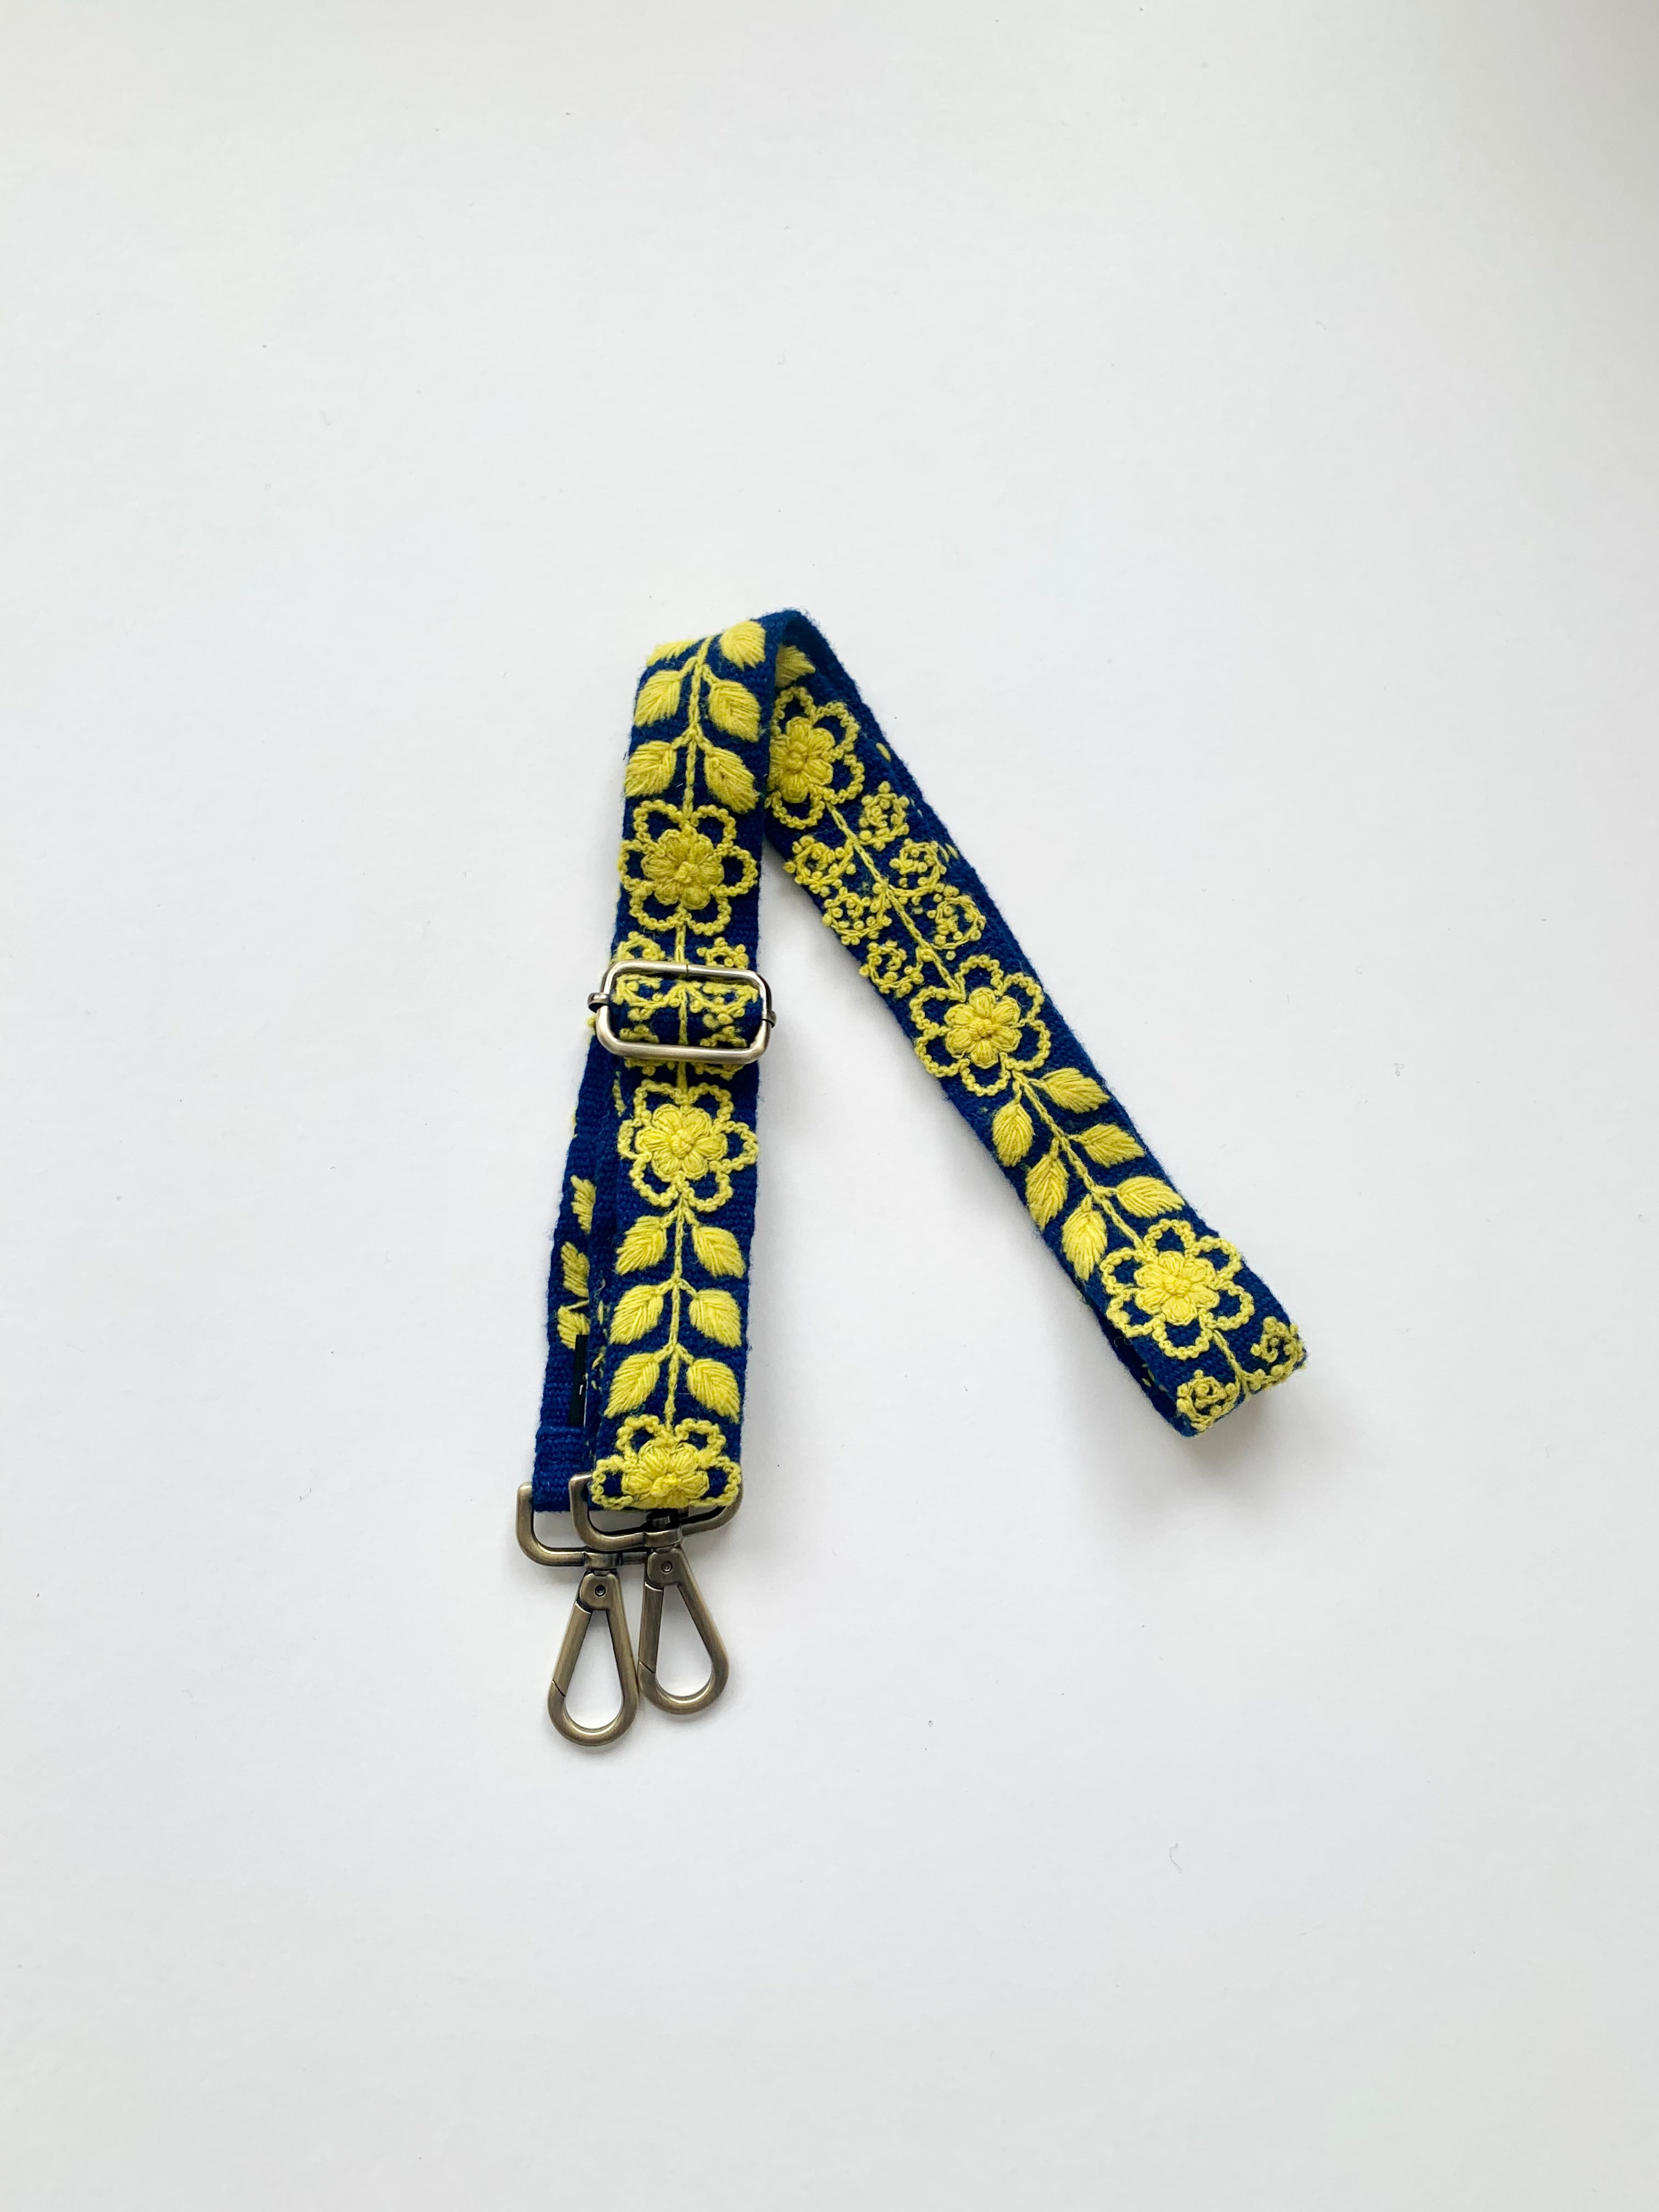 A blue and yellow strap with metal hooks and a buckle